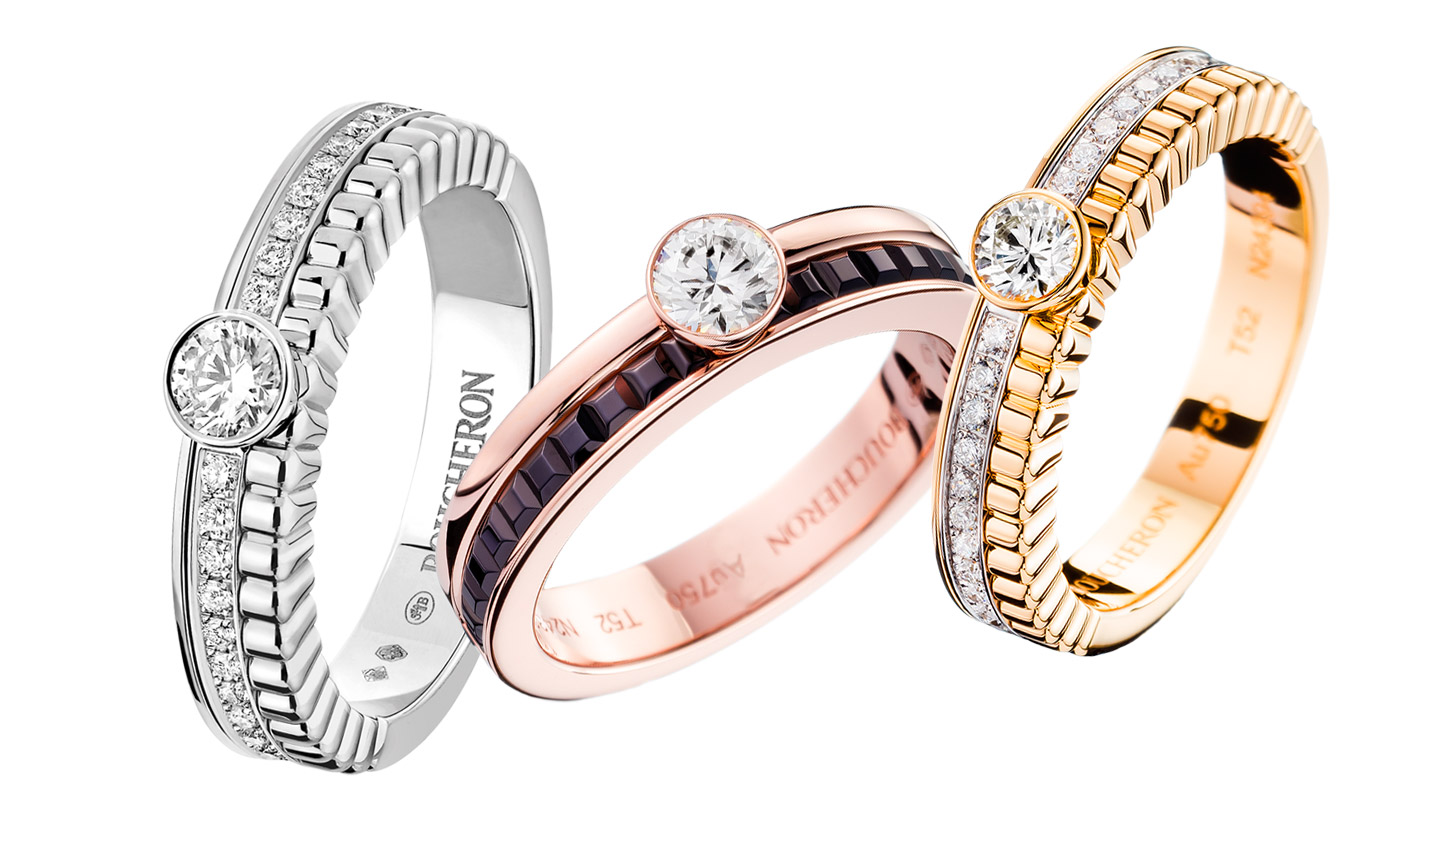 Boucheron 'Quatre Radiant' diamond engagement rings in white gold and yellow gold, with 'Quatre Classique' diamond engagement ring in rose gold with brown diamonds